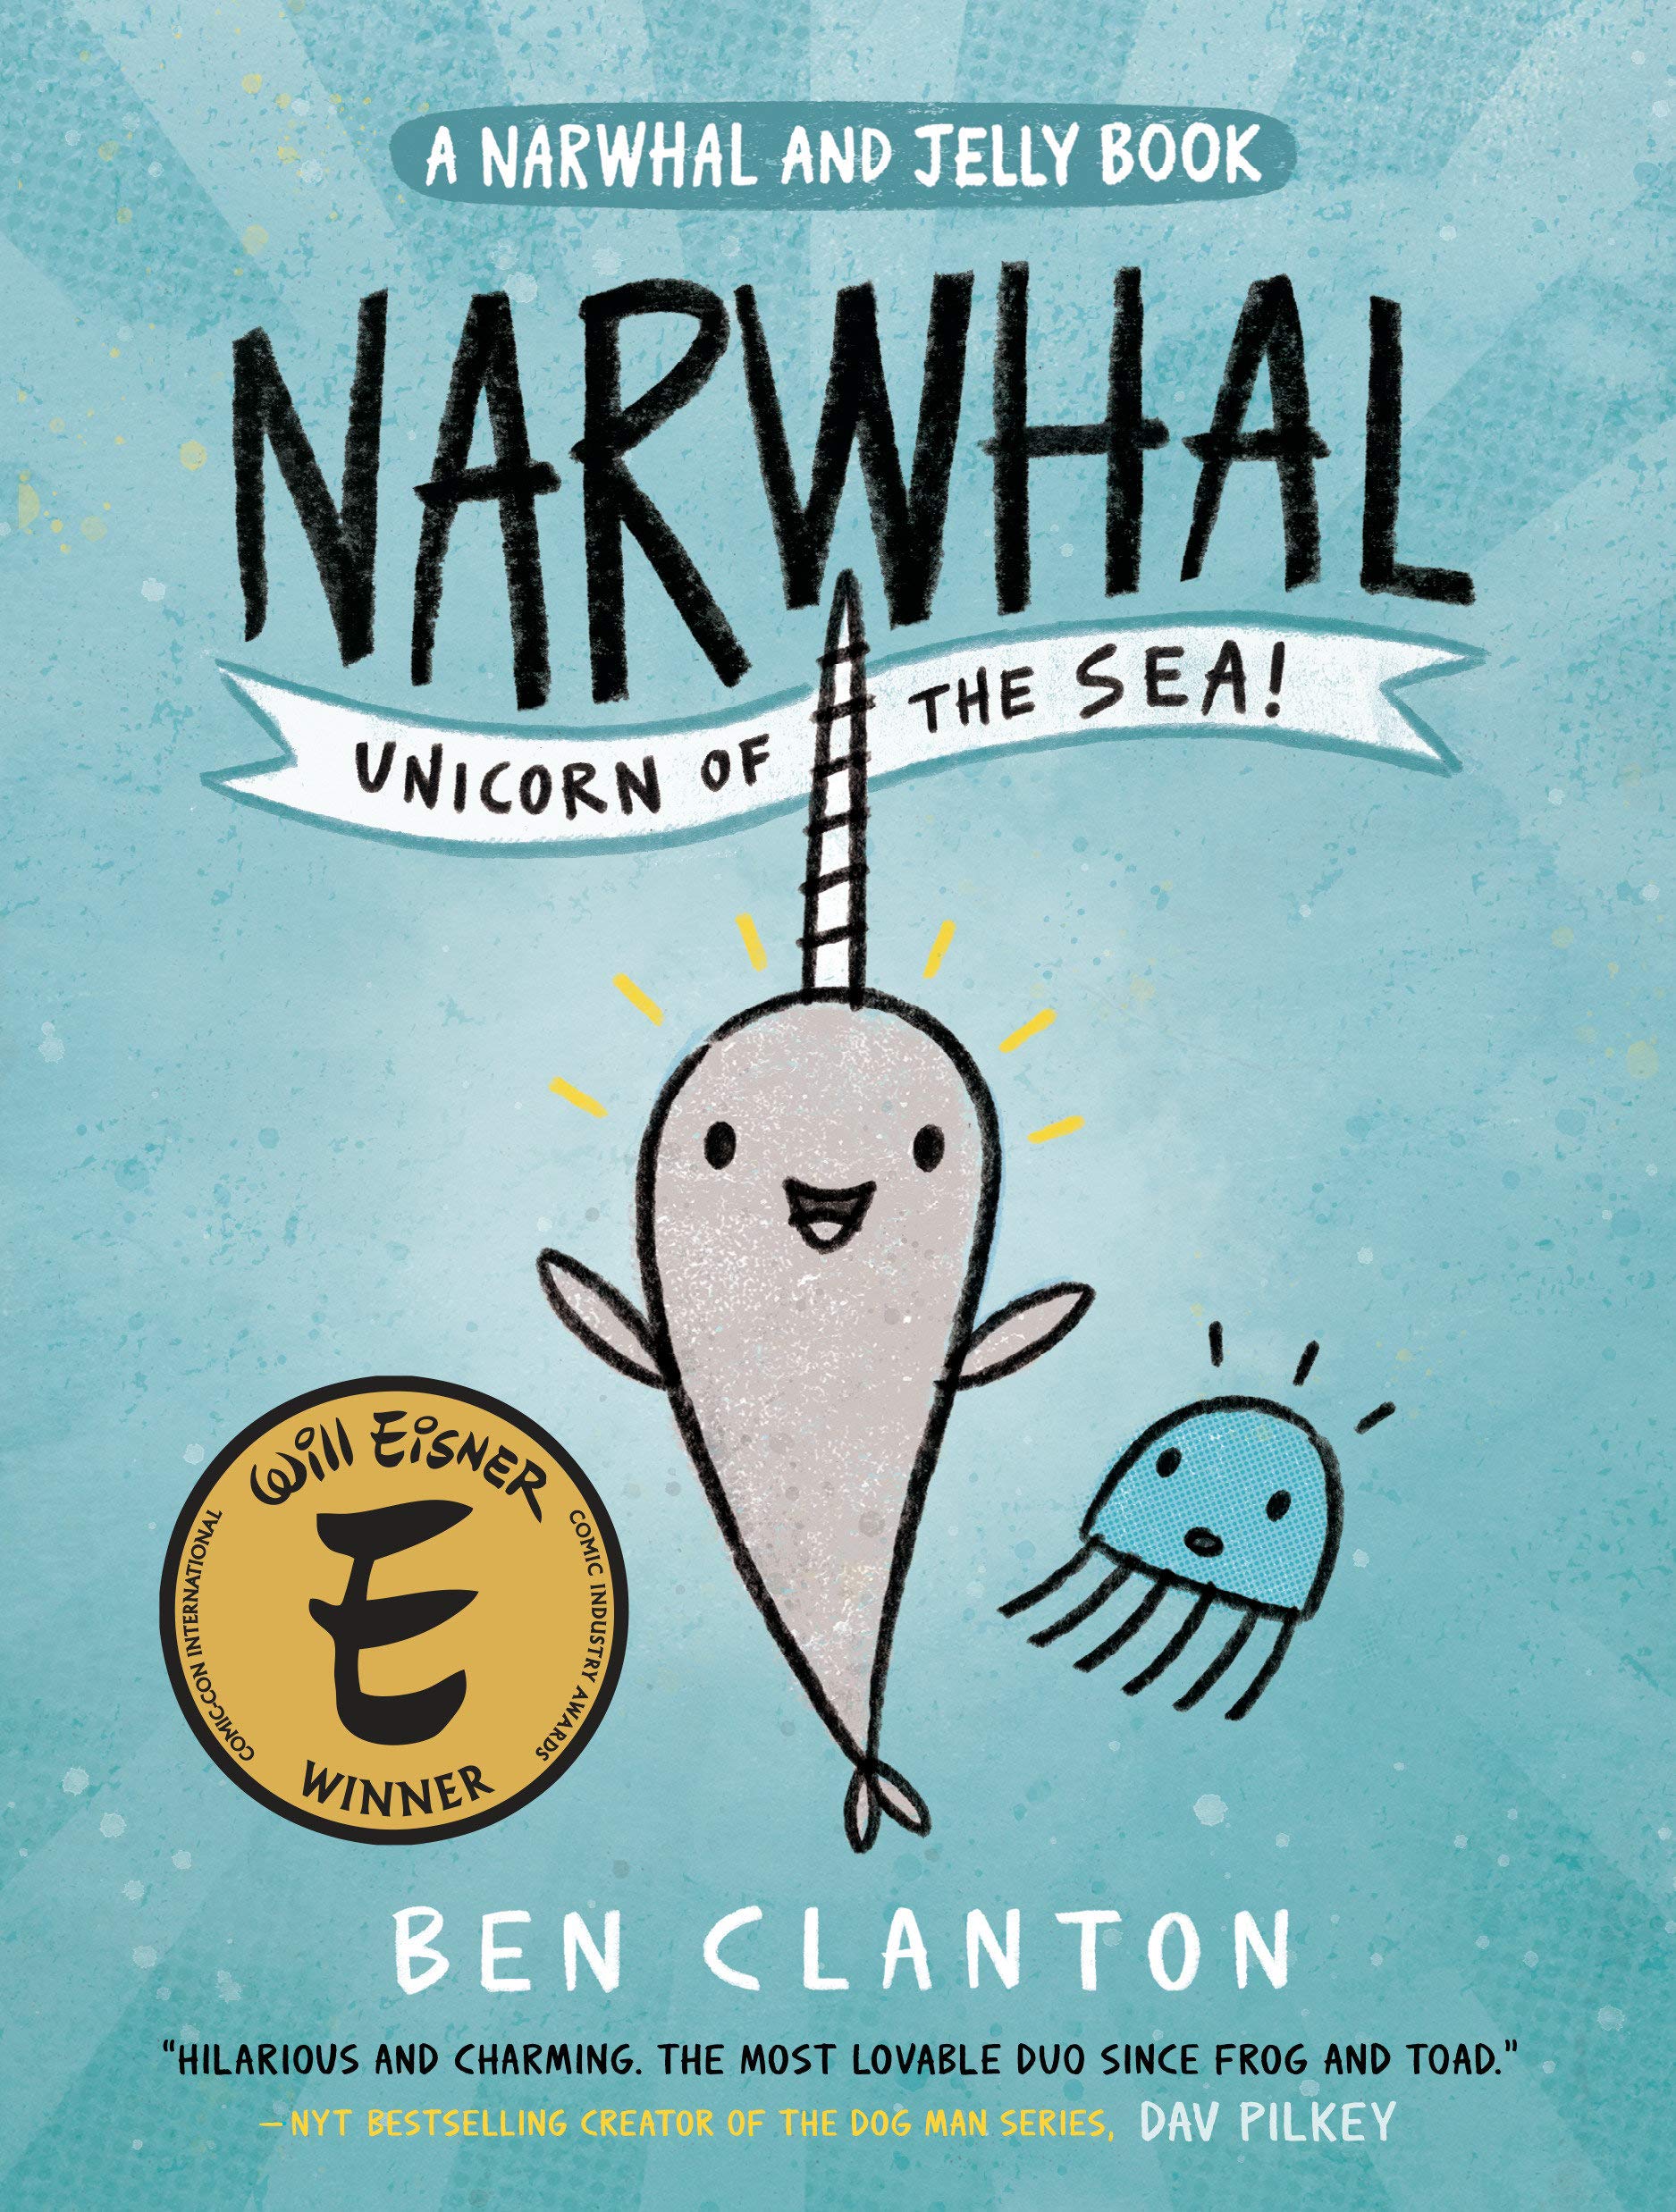 Narwhal Unicorn of the Sea bookcover